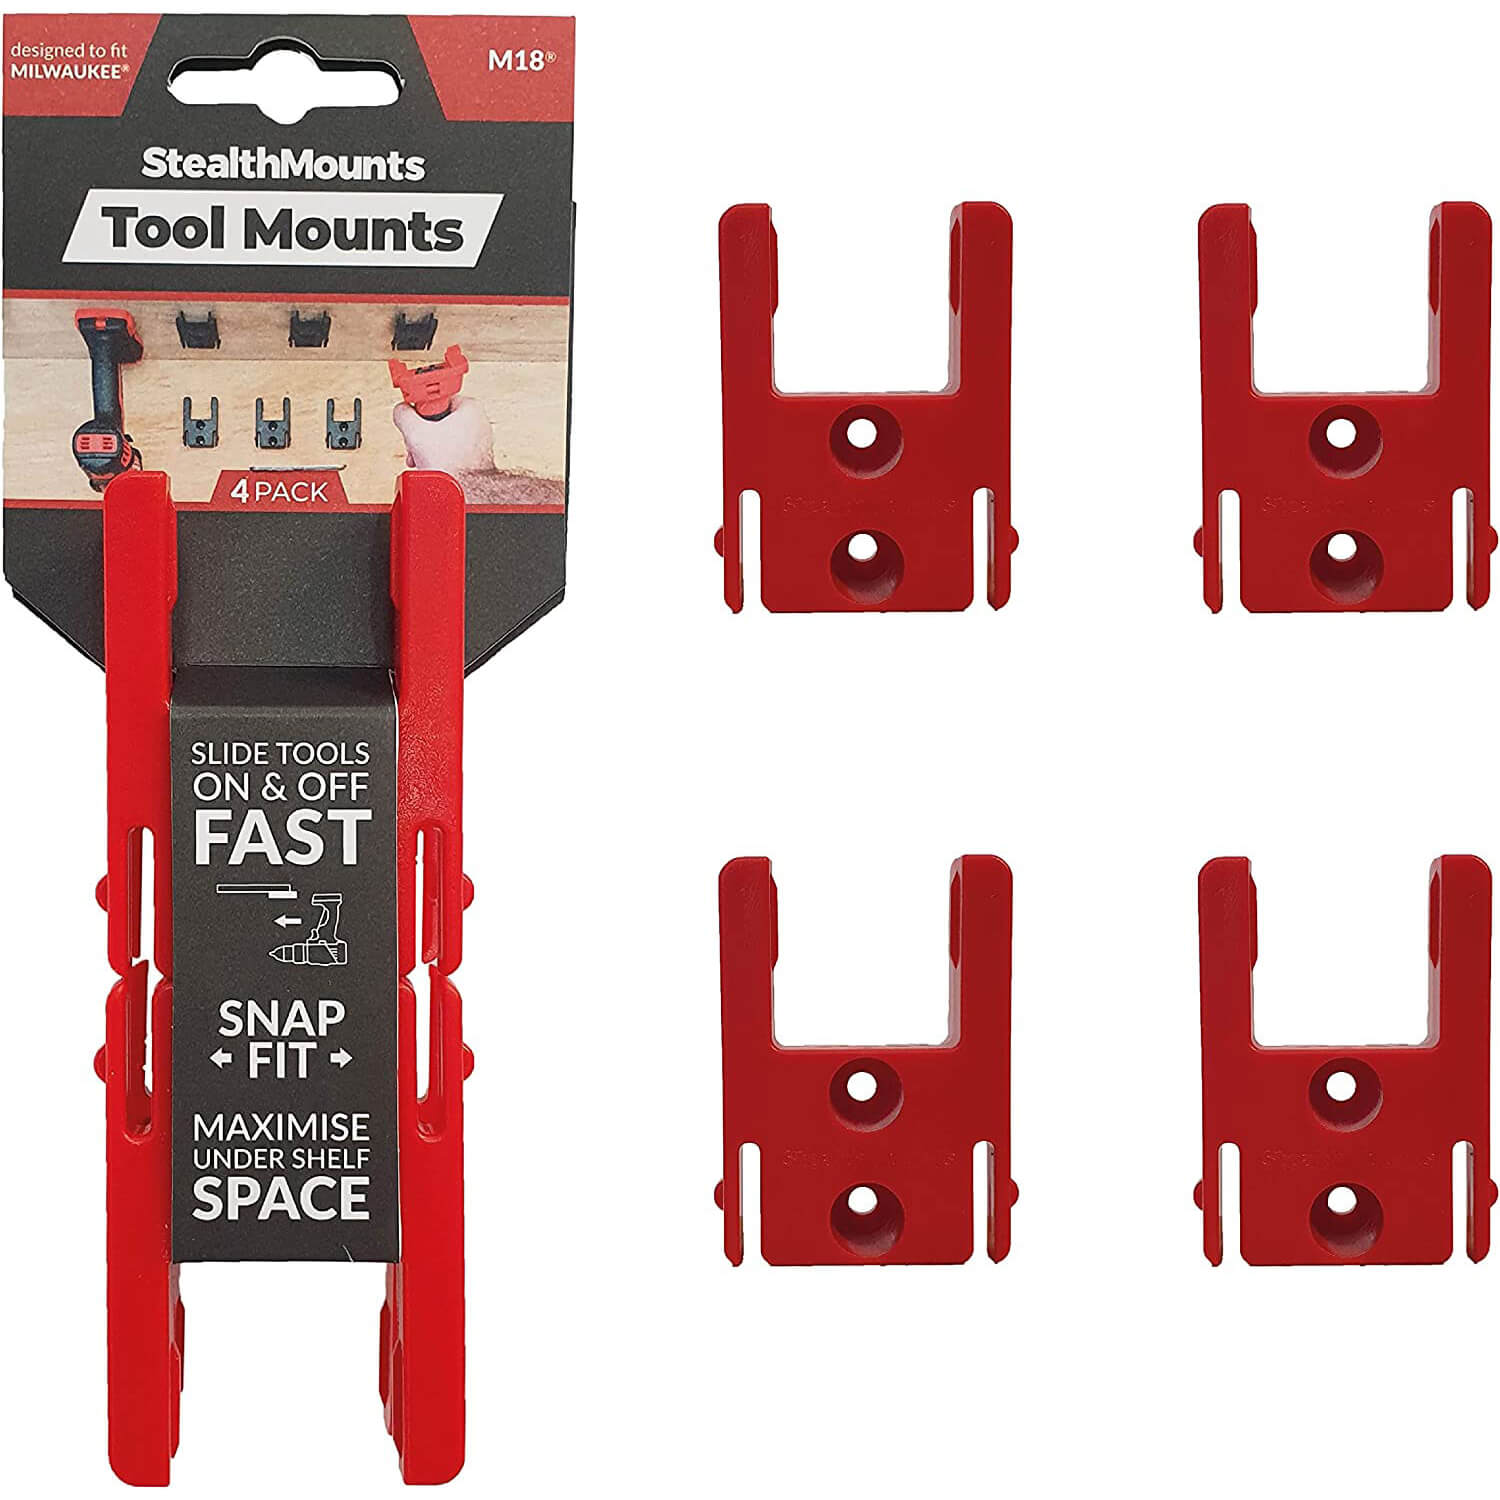 Image of Stealth Mounts 4 Pack Tool Mounts For Milwaukee 18v M18 Tools Red